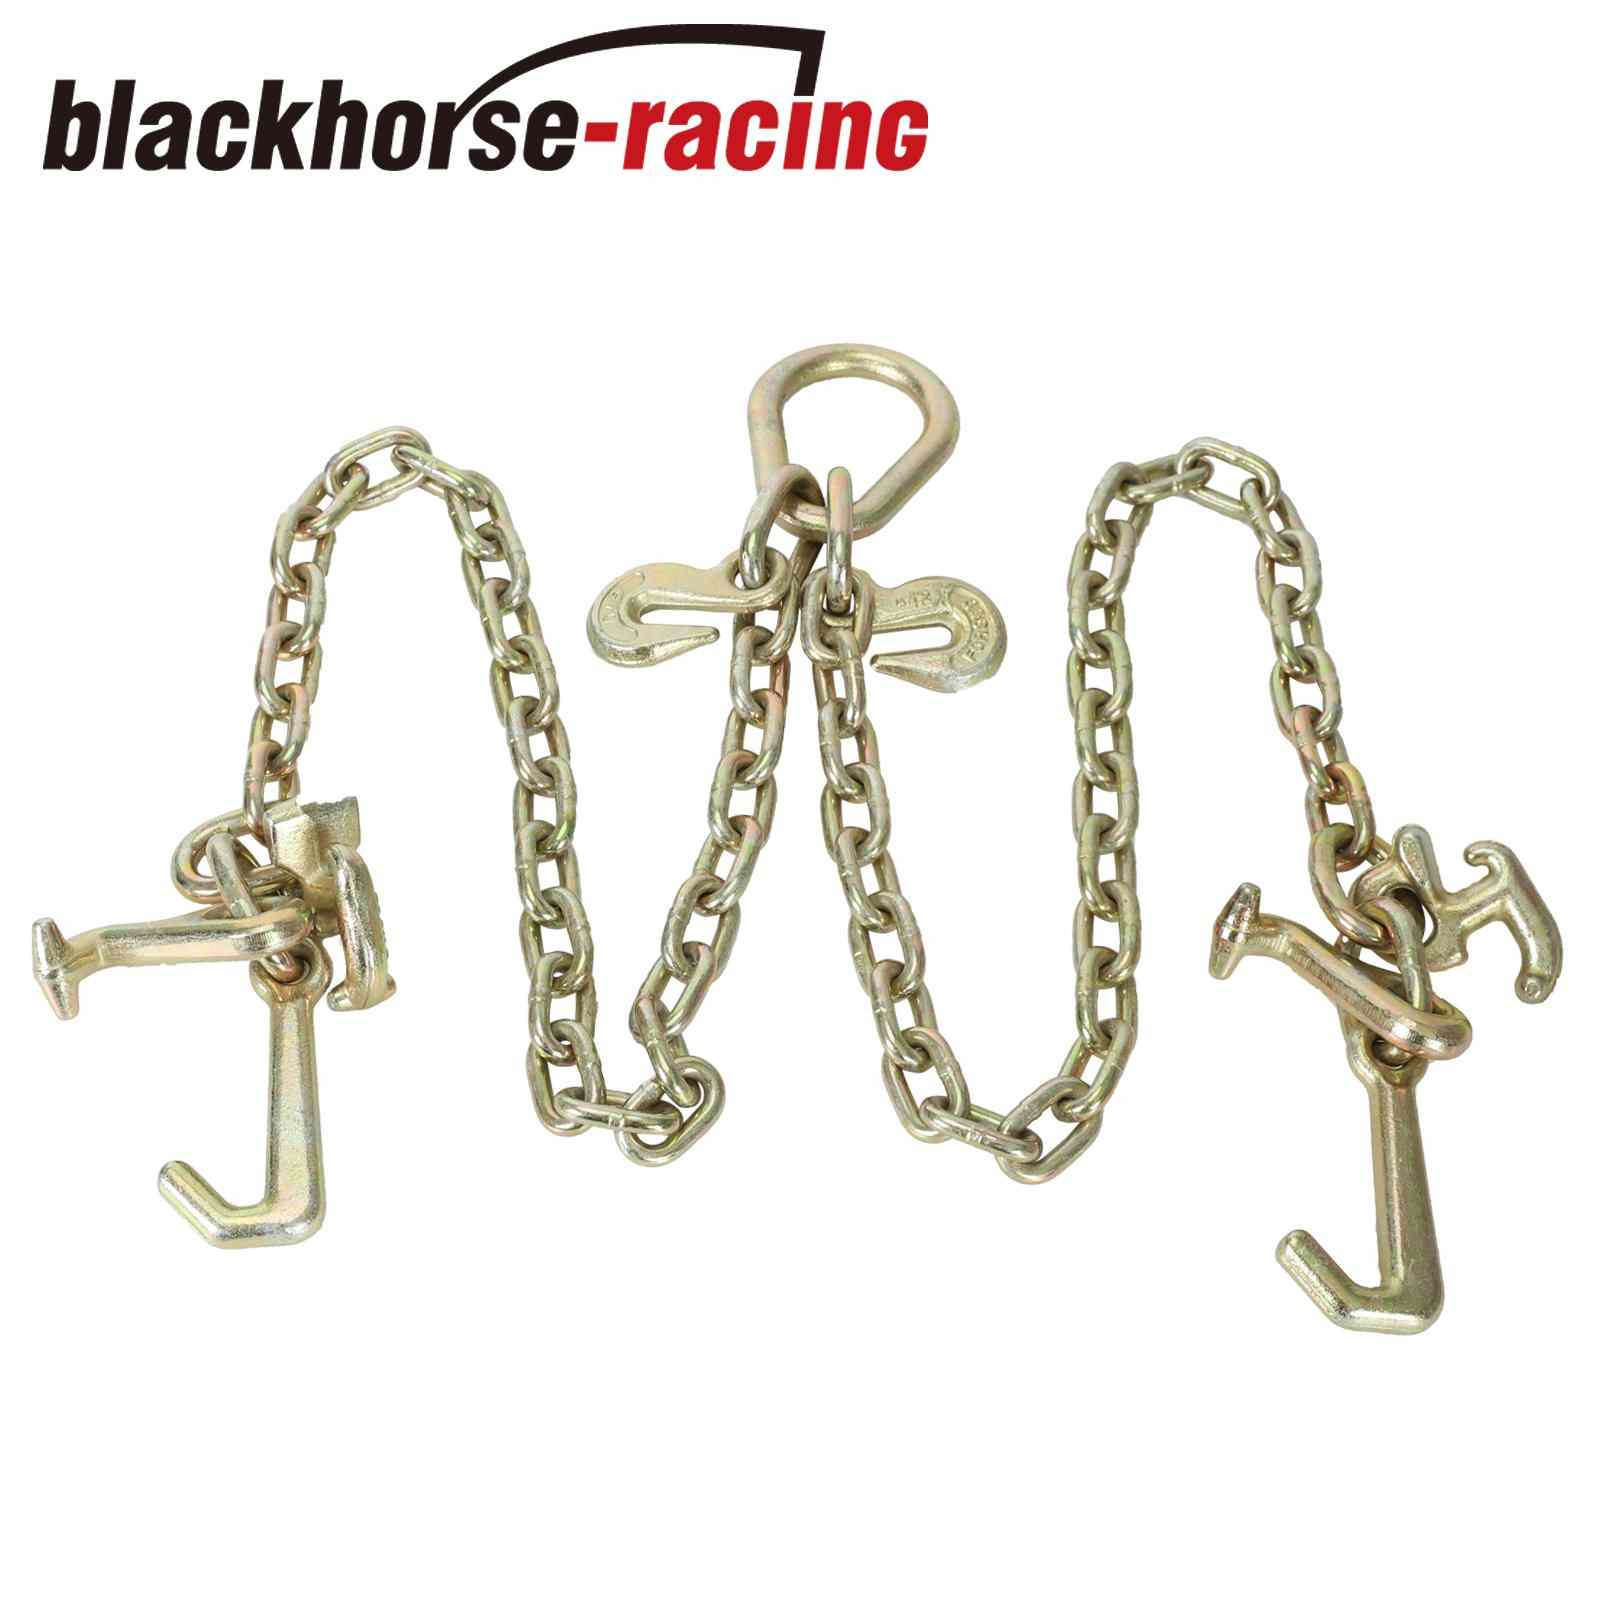 G70 4700 WLL V-Chain Bridle w/RTJ Cluster Hooks and Grab Hooks 3' Legs Tow Chain